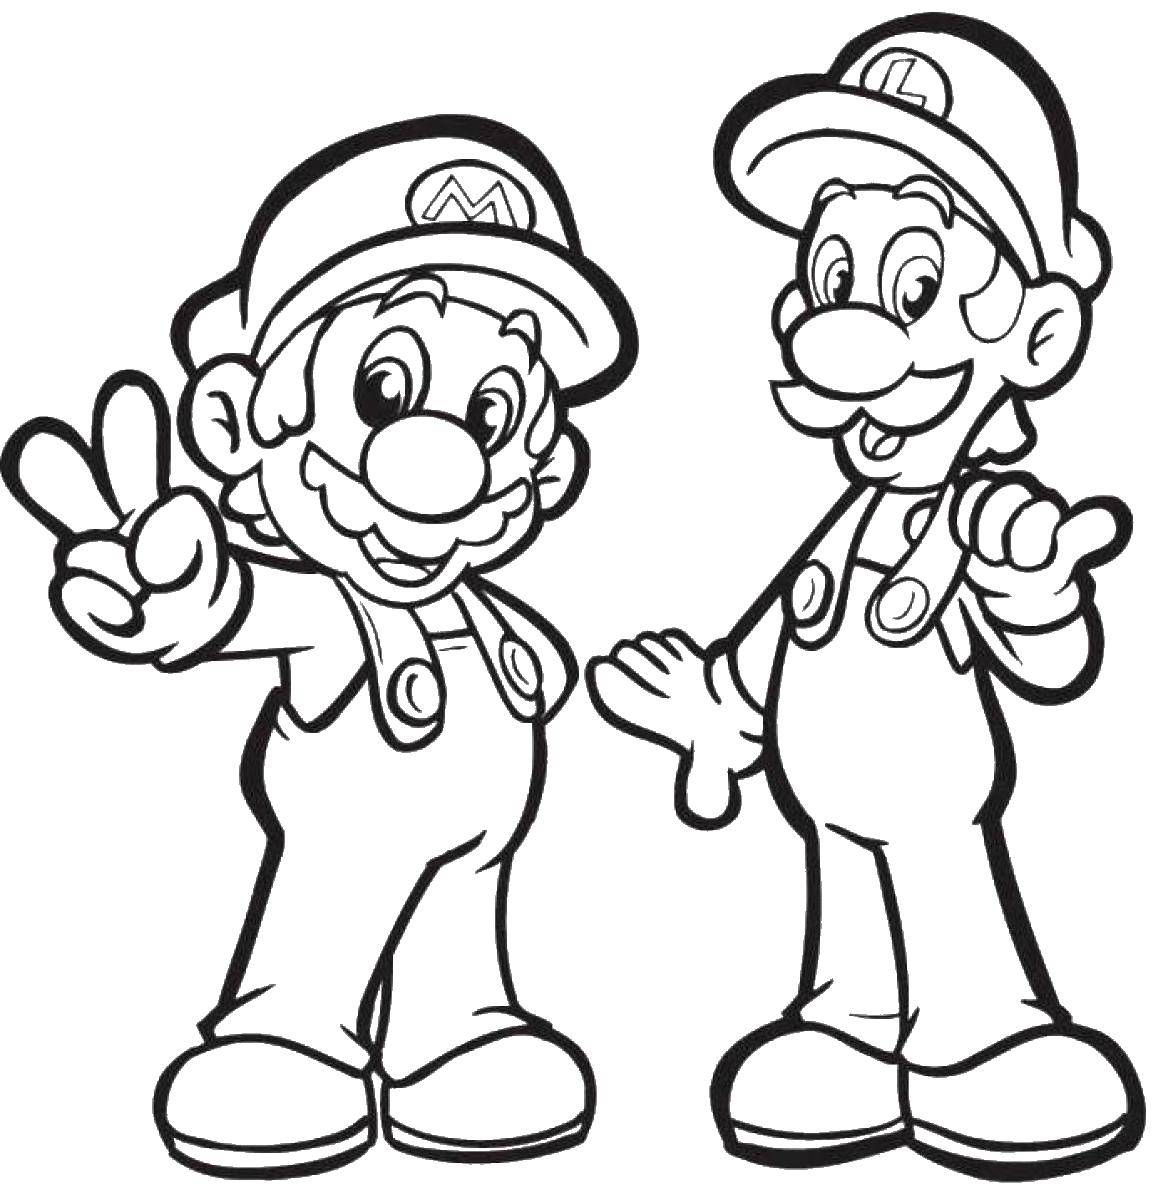 Coloring Mario. Category The character from the game. Tags:  games, console, Mario.